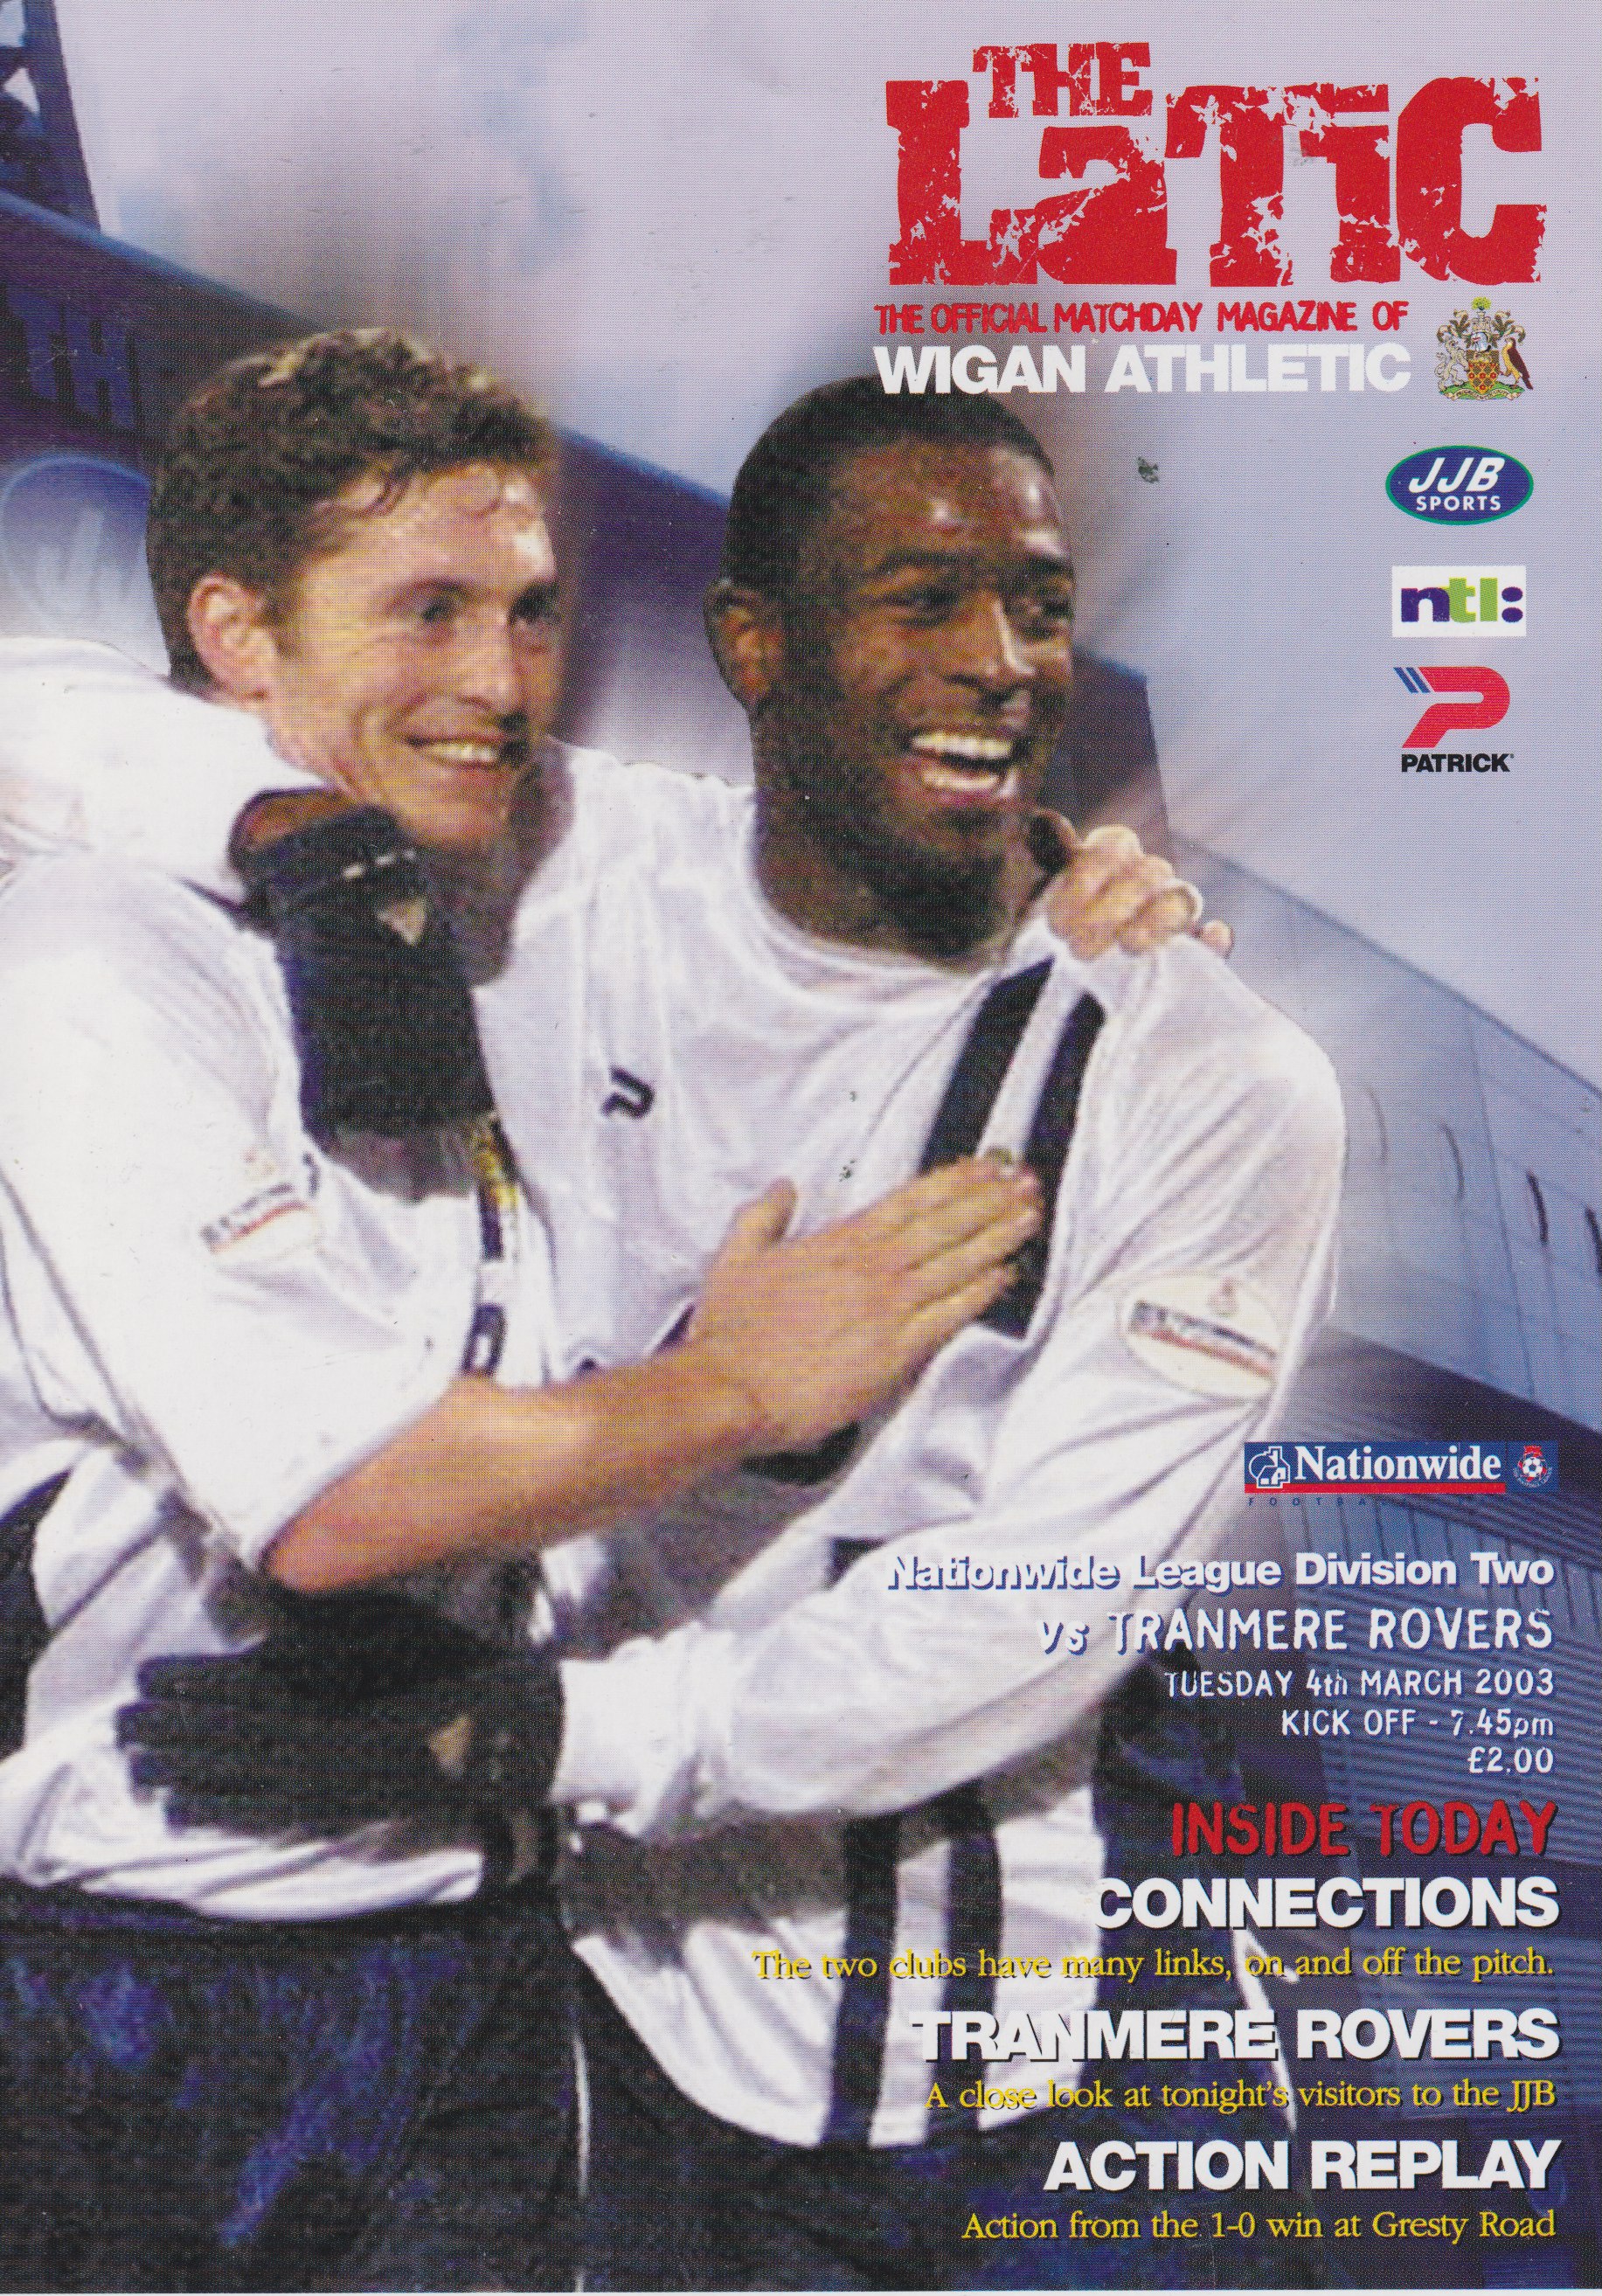 Match Programme For {home}} 0-0 Tranmere Rovers, League, 2003-03-04